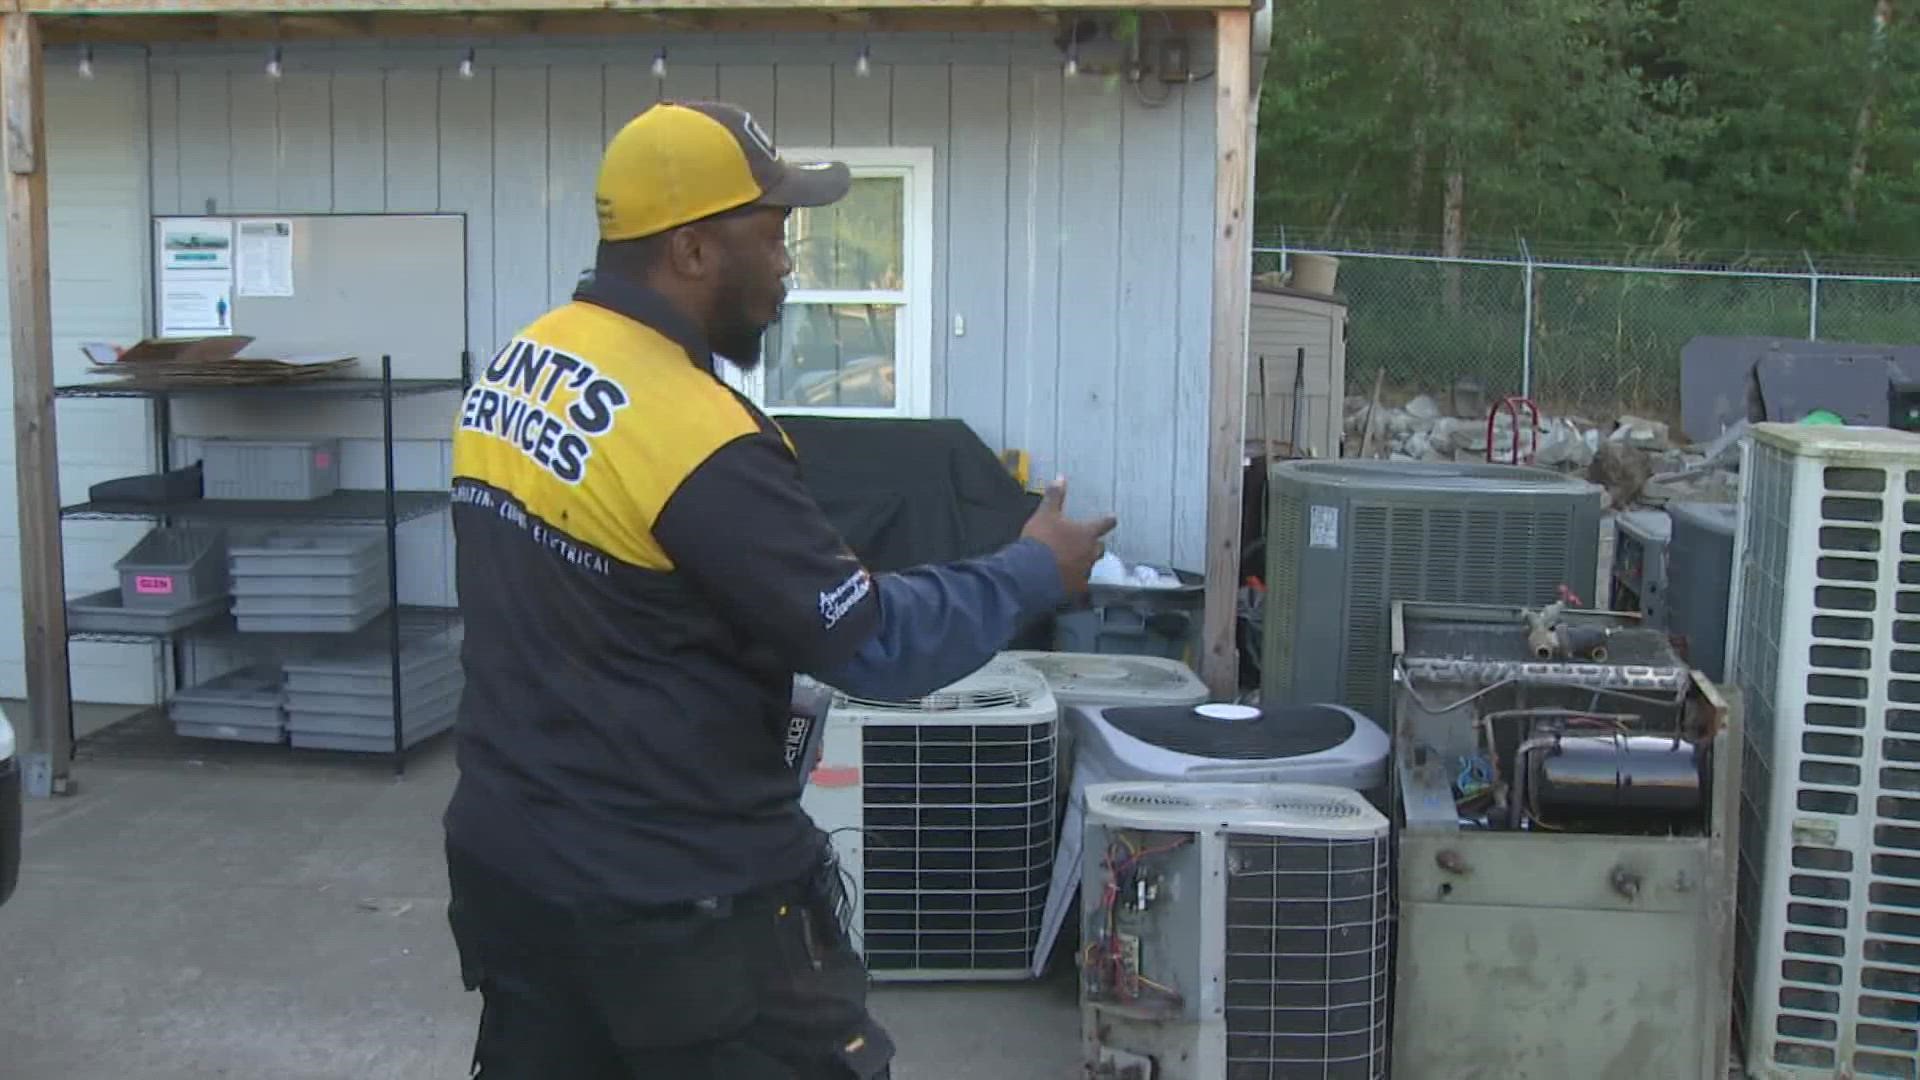 Air conditioning companies are seeing a rise in calls as western Washington anticipates hot weather.